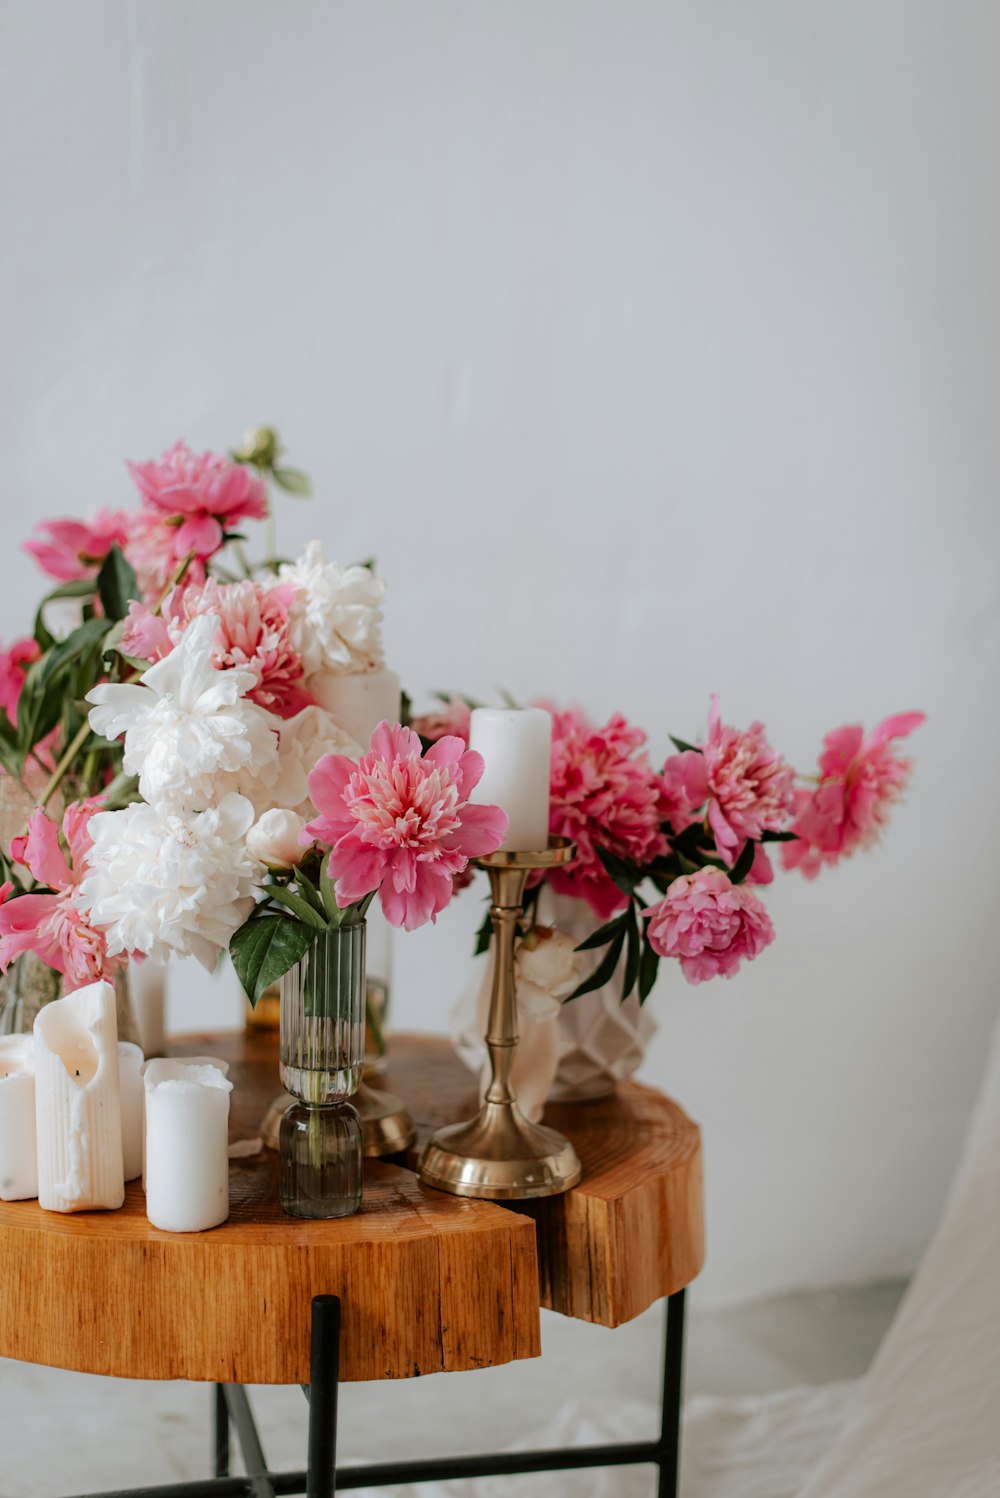 a wooden table topped with a vase filled with pink and white flowers